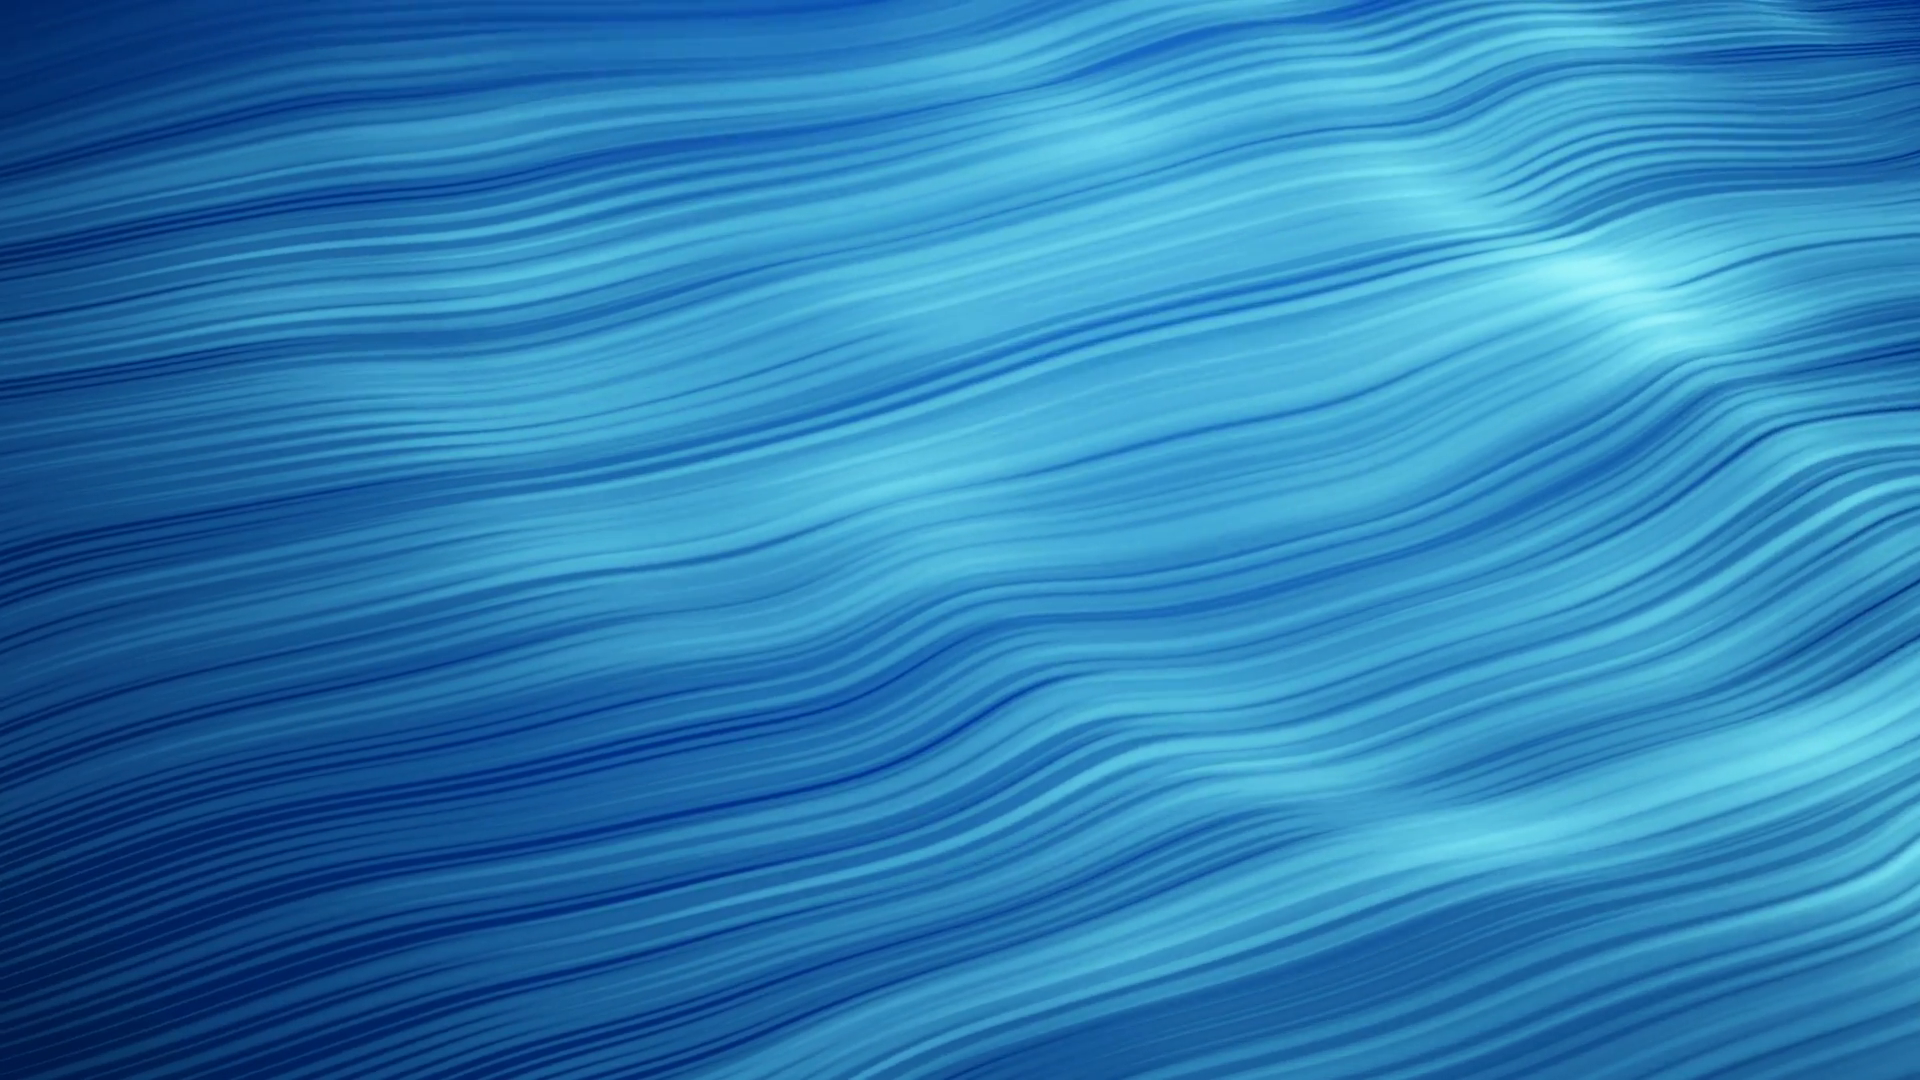 Wavy Animated Tranquil Blue Surface Loopable Motion Background